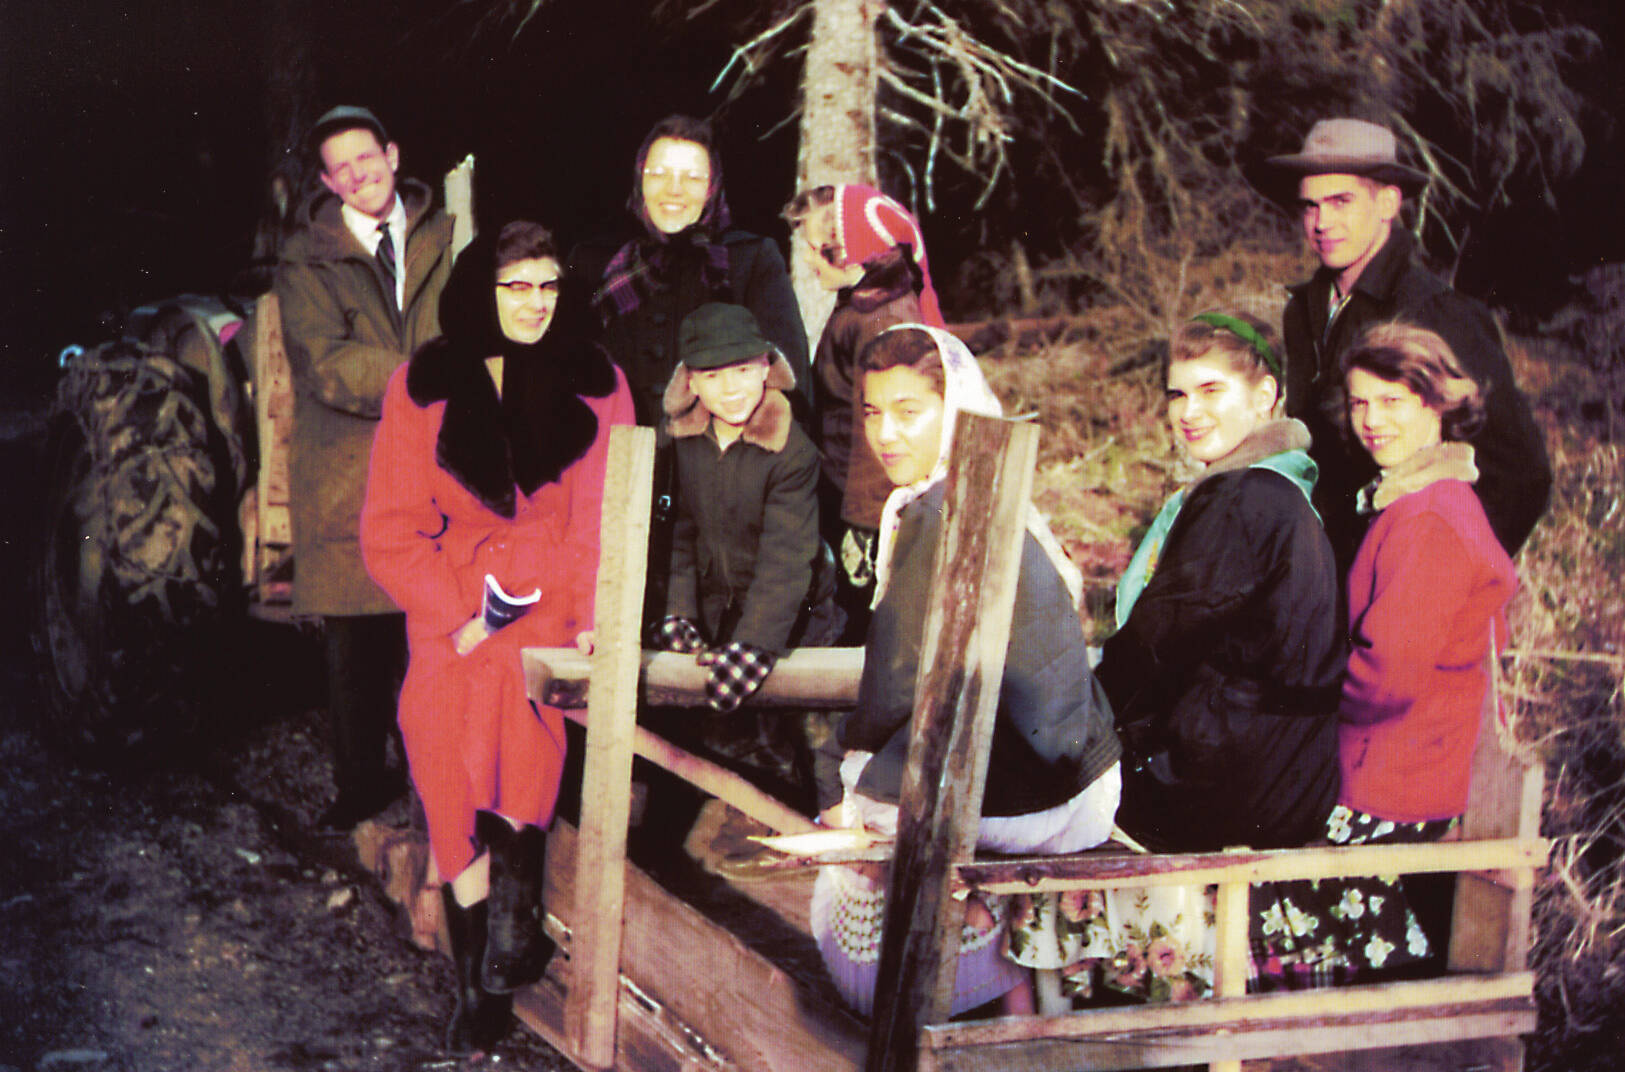 Members of the Keeler family and some Anchor Point church members get a ride on Jimmy Elliot’s “mud sled” on the way to services at the Elliot home, circa 1956. Lorna Keeler is sitting on the far-left side of the sled. April Keeler is the middle girl of the trio sitting in back, and Larry Keeler is standing behind those girls. (Photo courtesy of the Pratt Museum)